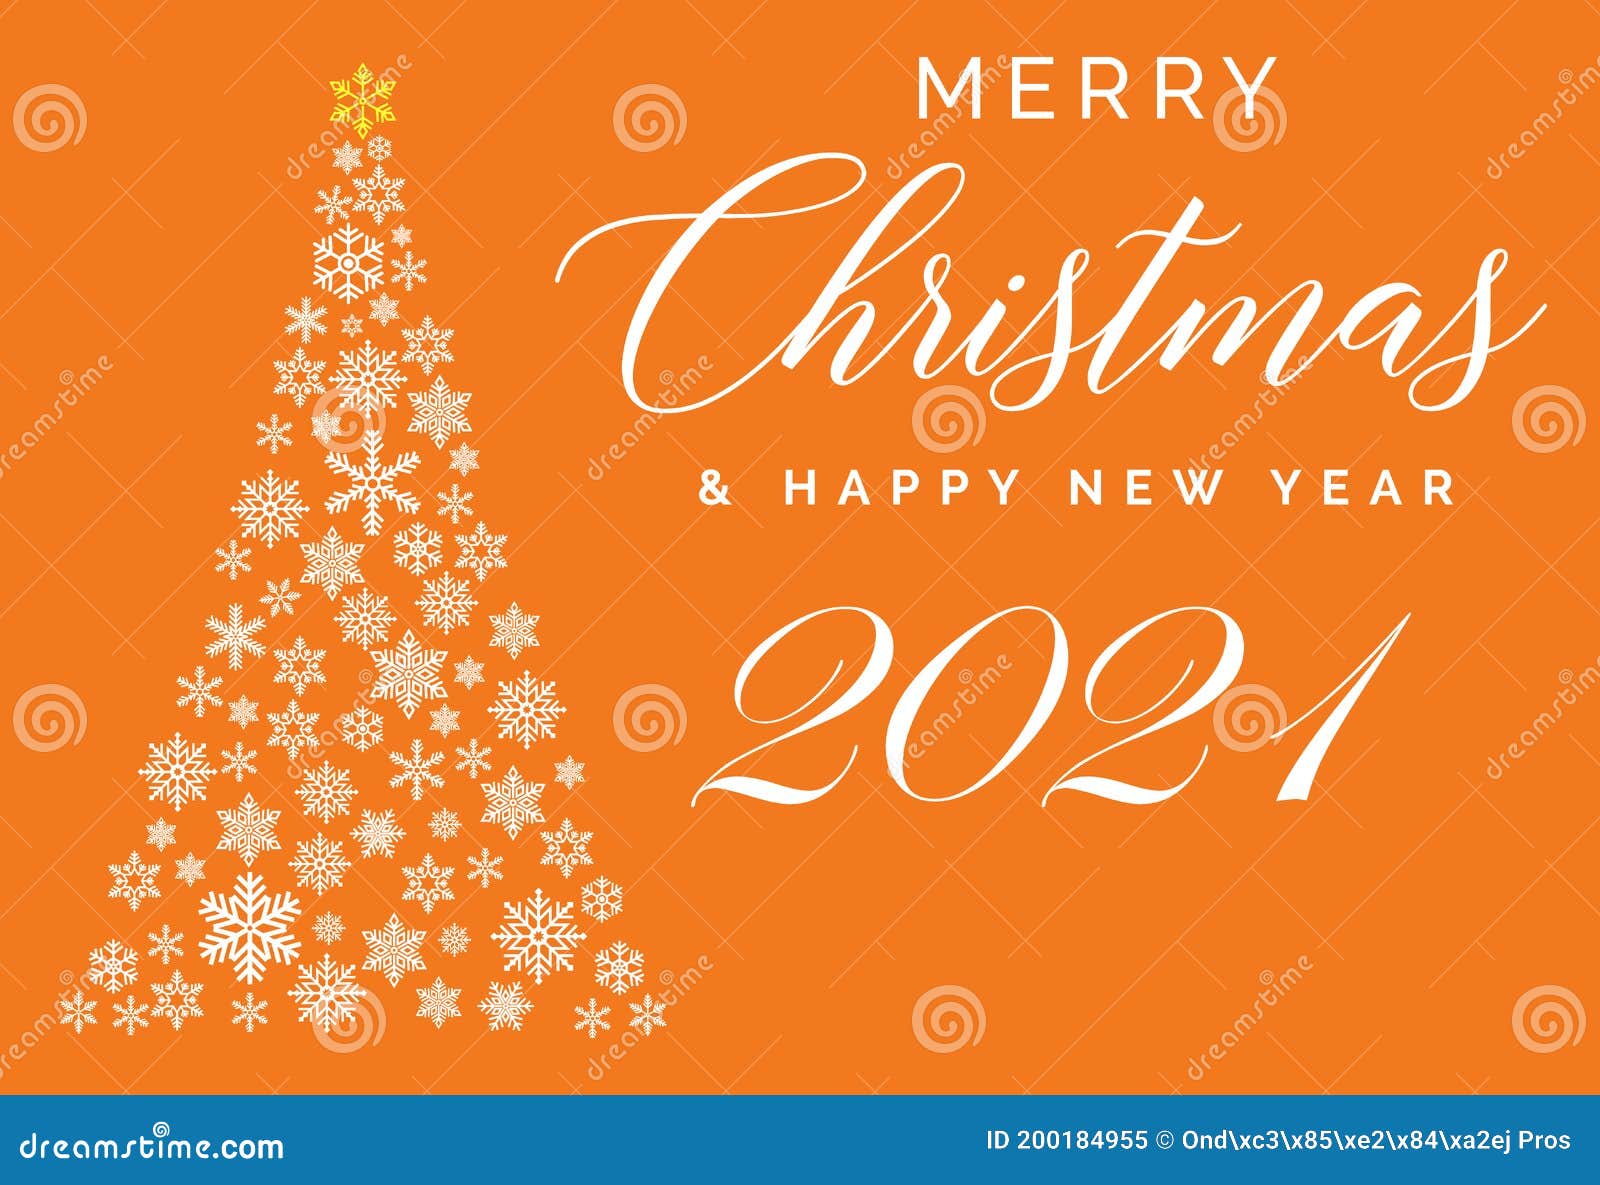 Merry Christmas And Happy New Year 21 Lettering Template Greeting Card Or Invitation Winter Holidays Related Typograph Stock Vector Illustration Of Ornament Element